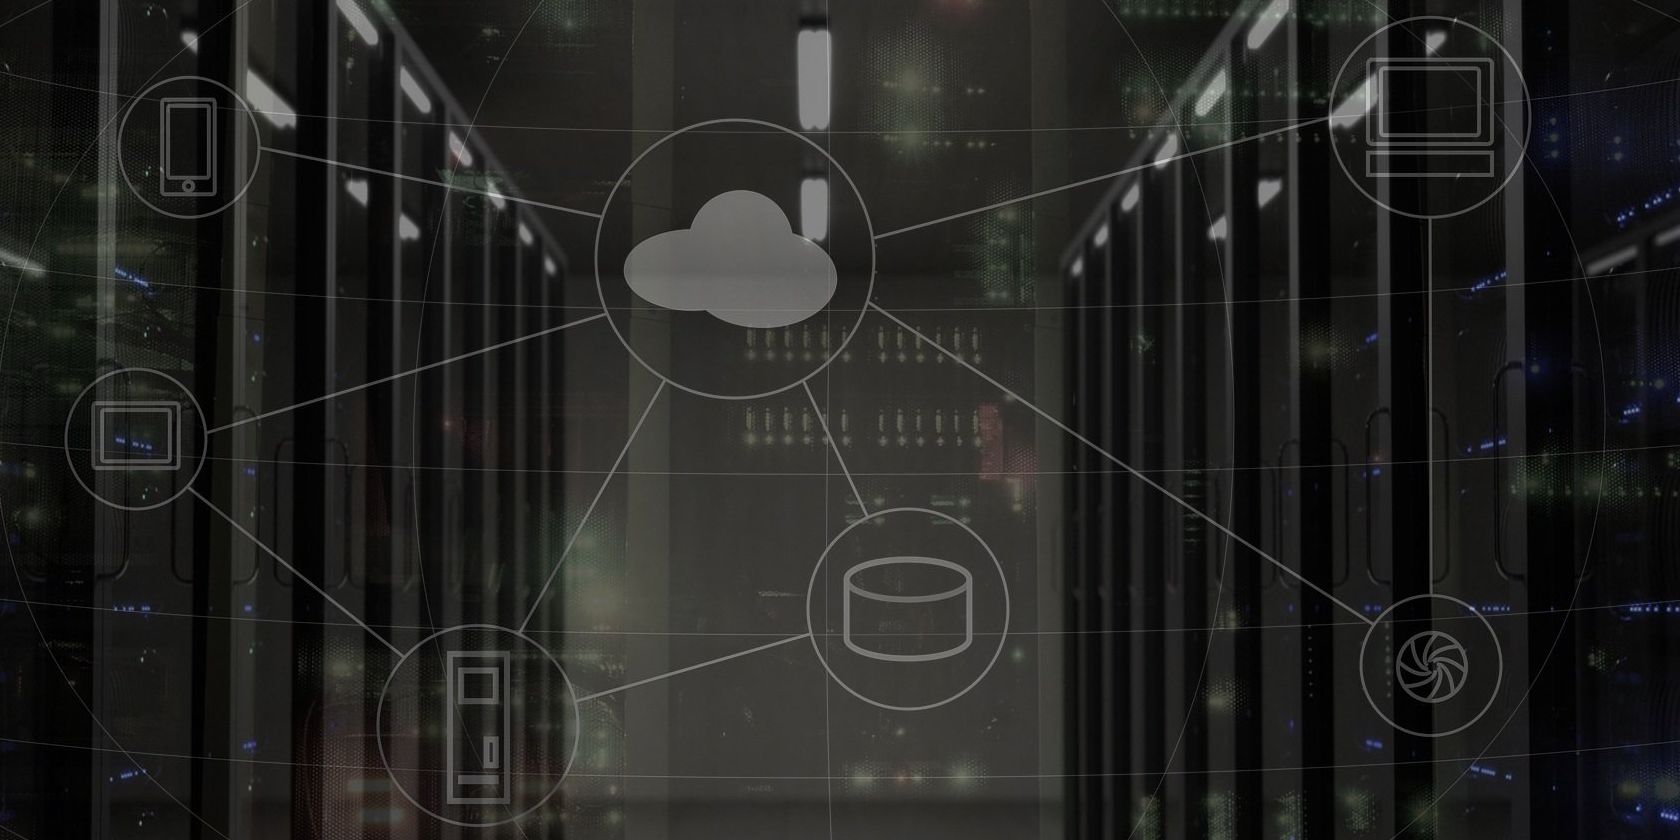 Server room with cloud, network and computer symbols